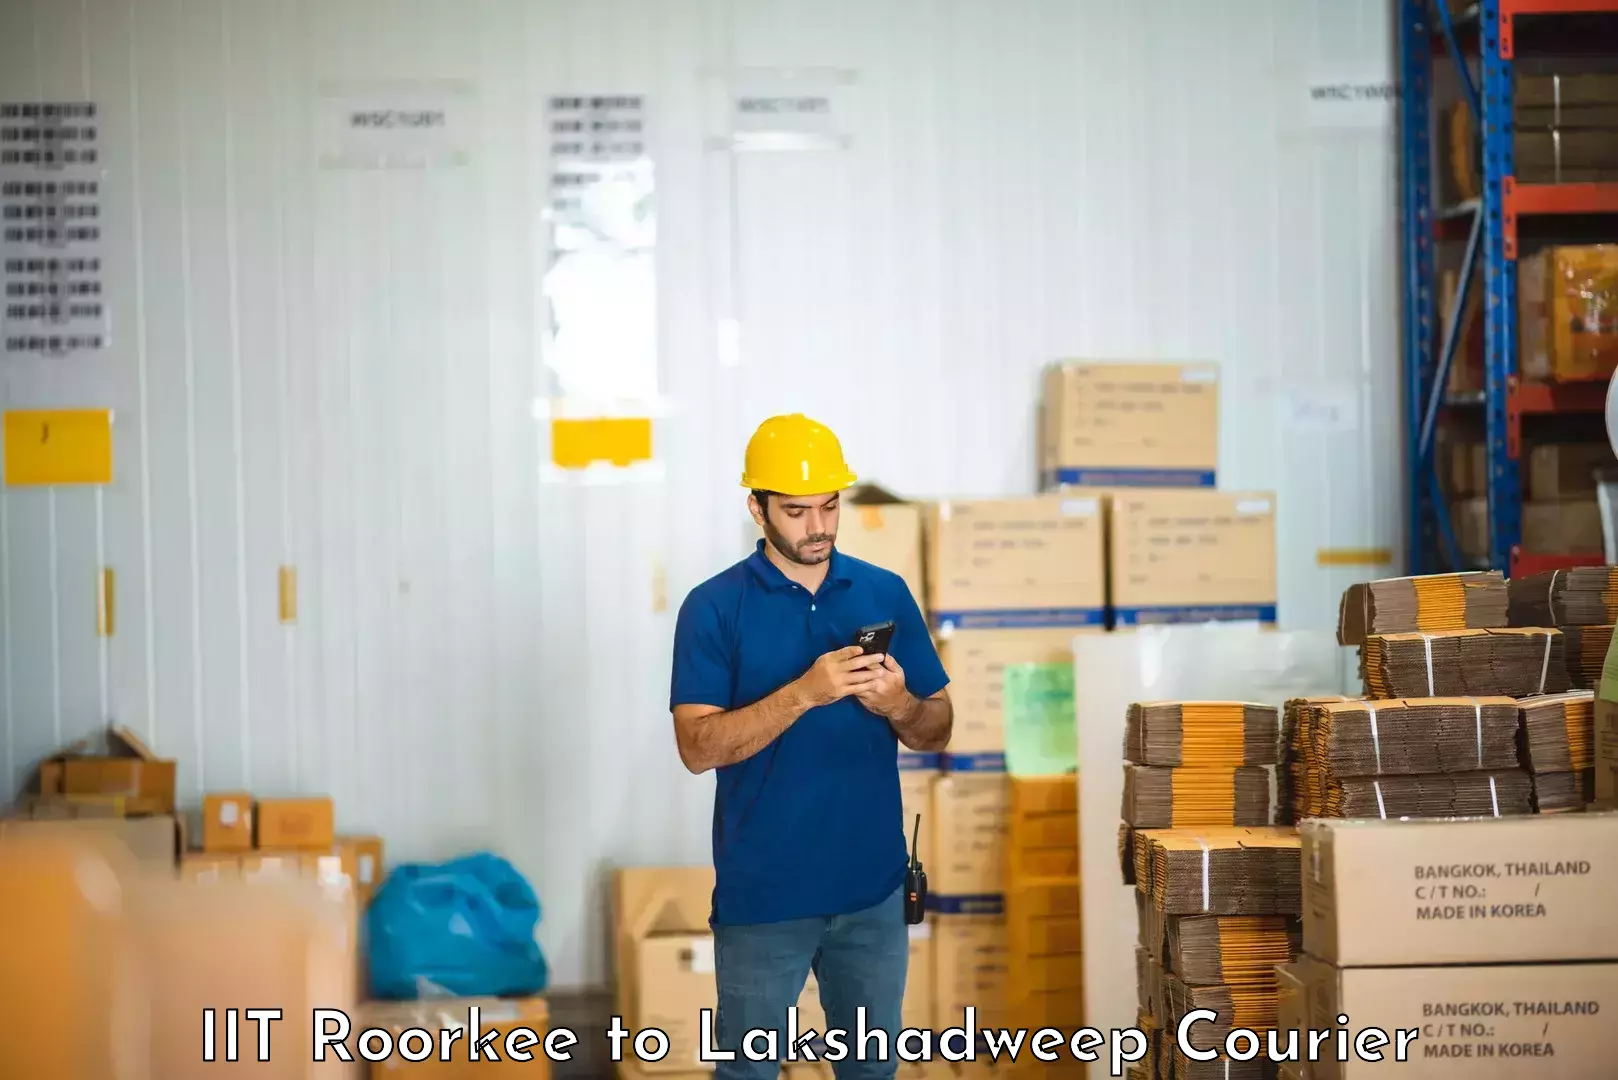 Trusted moving company IIT Roorkee to Lakshadweep